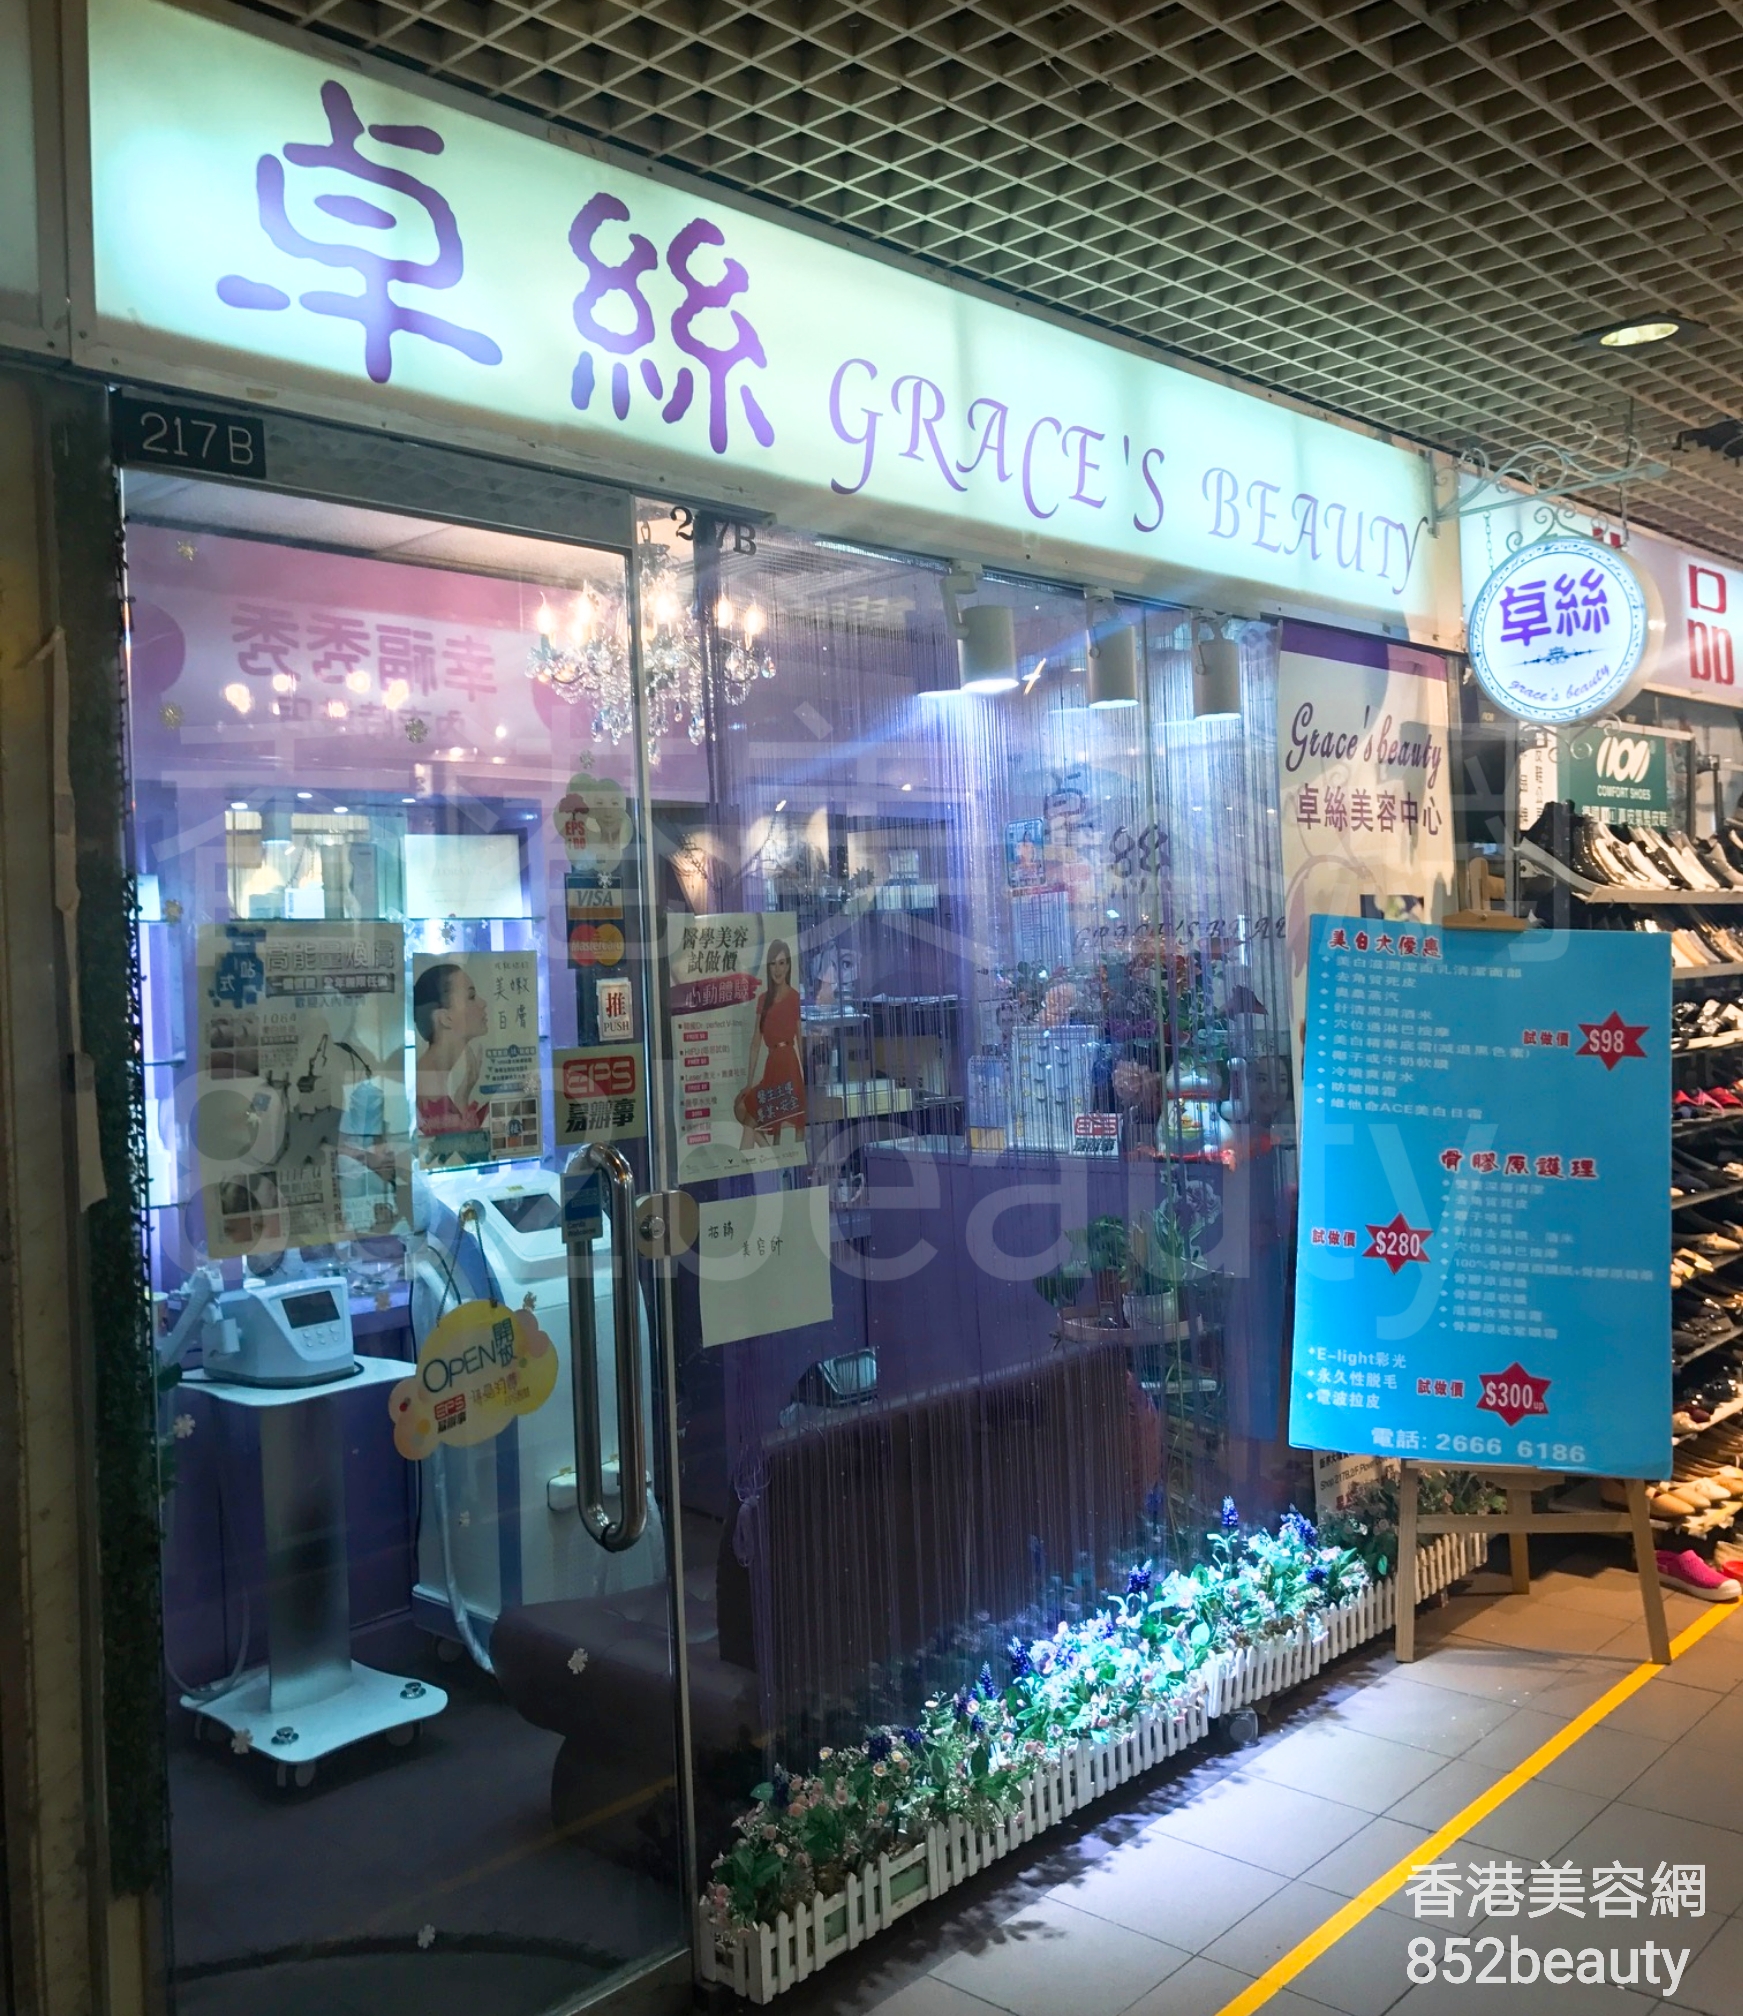 Hand and foot care: 卓絲美容中心 Grace's Beauty